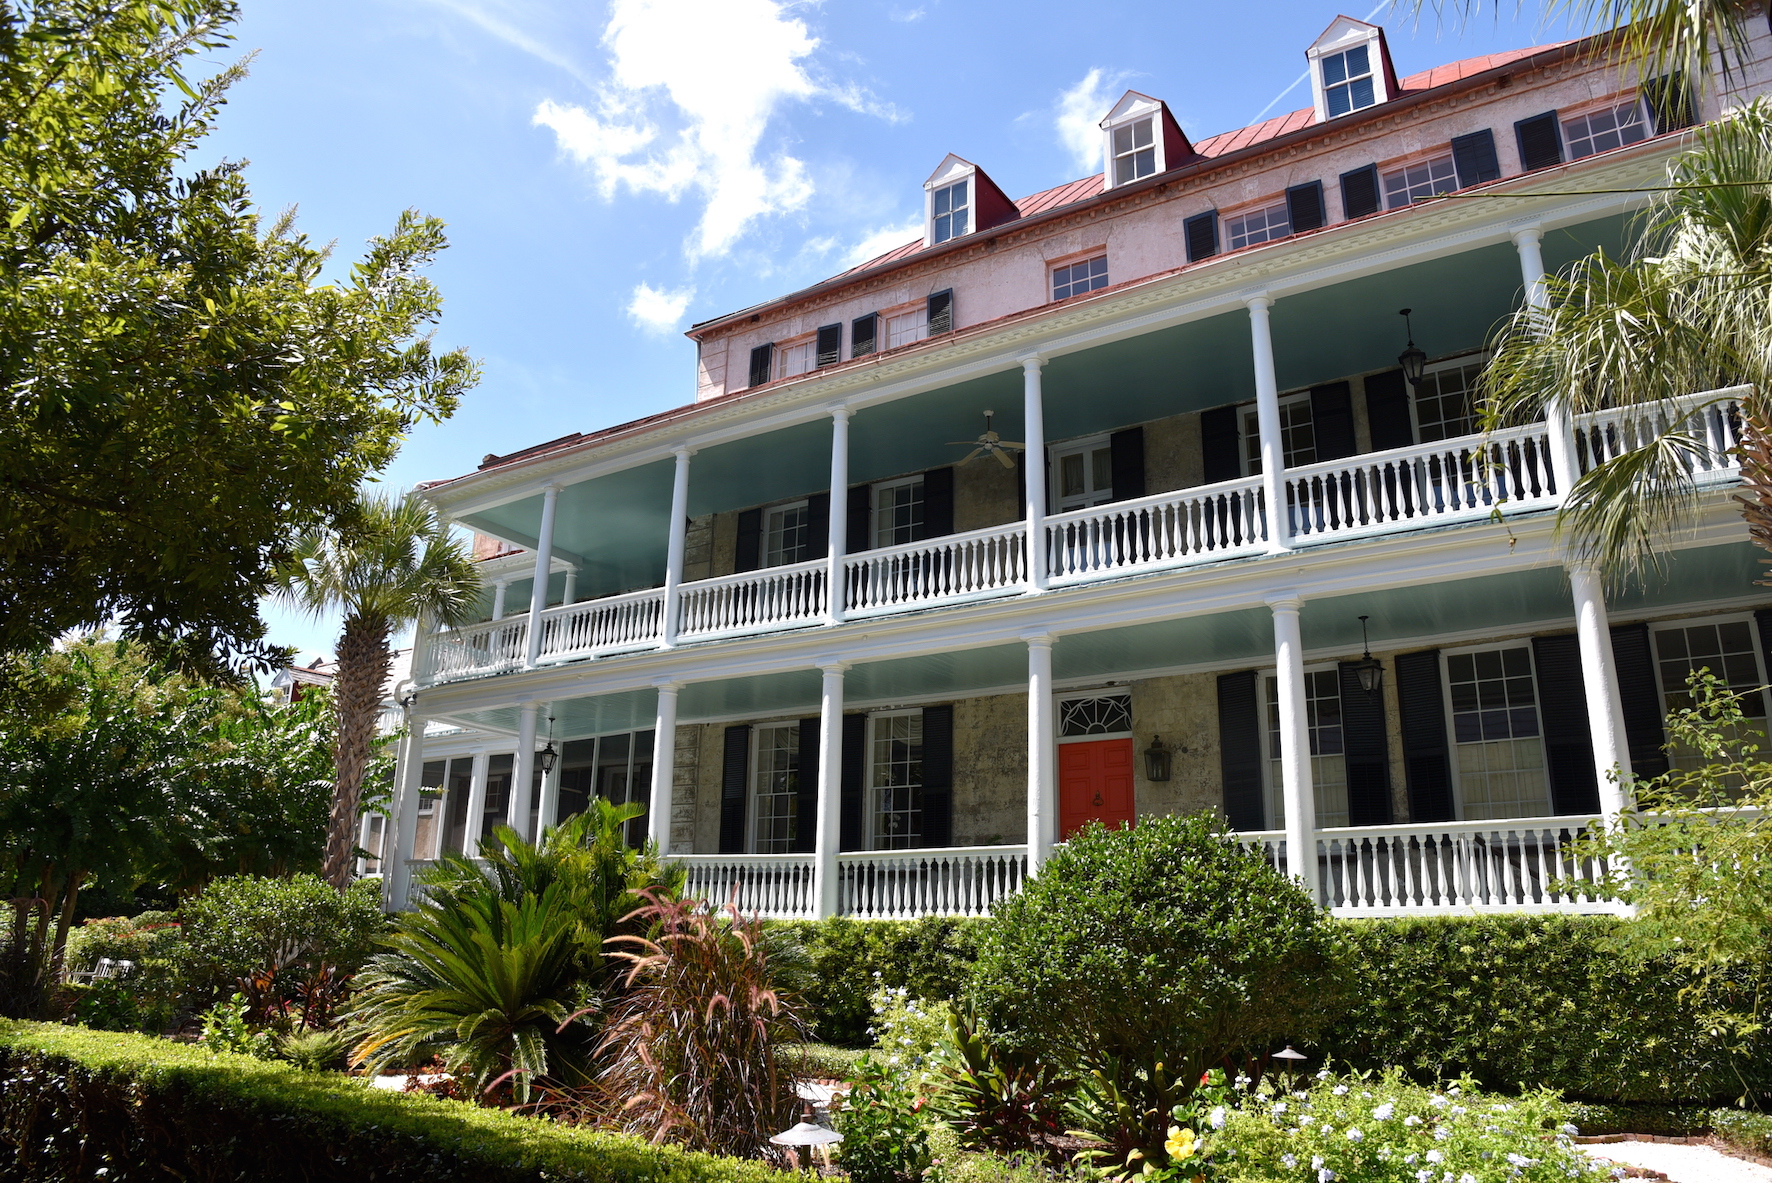 Typical southern home architecture in Charleston, South Carolina